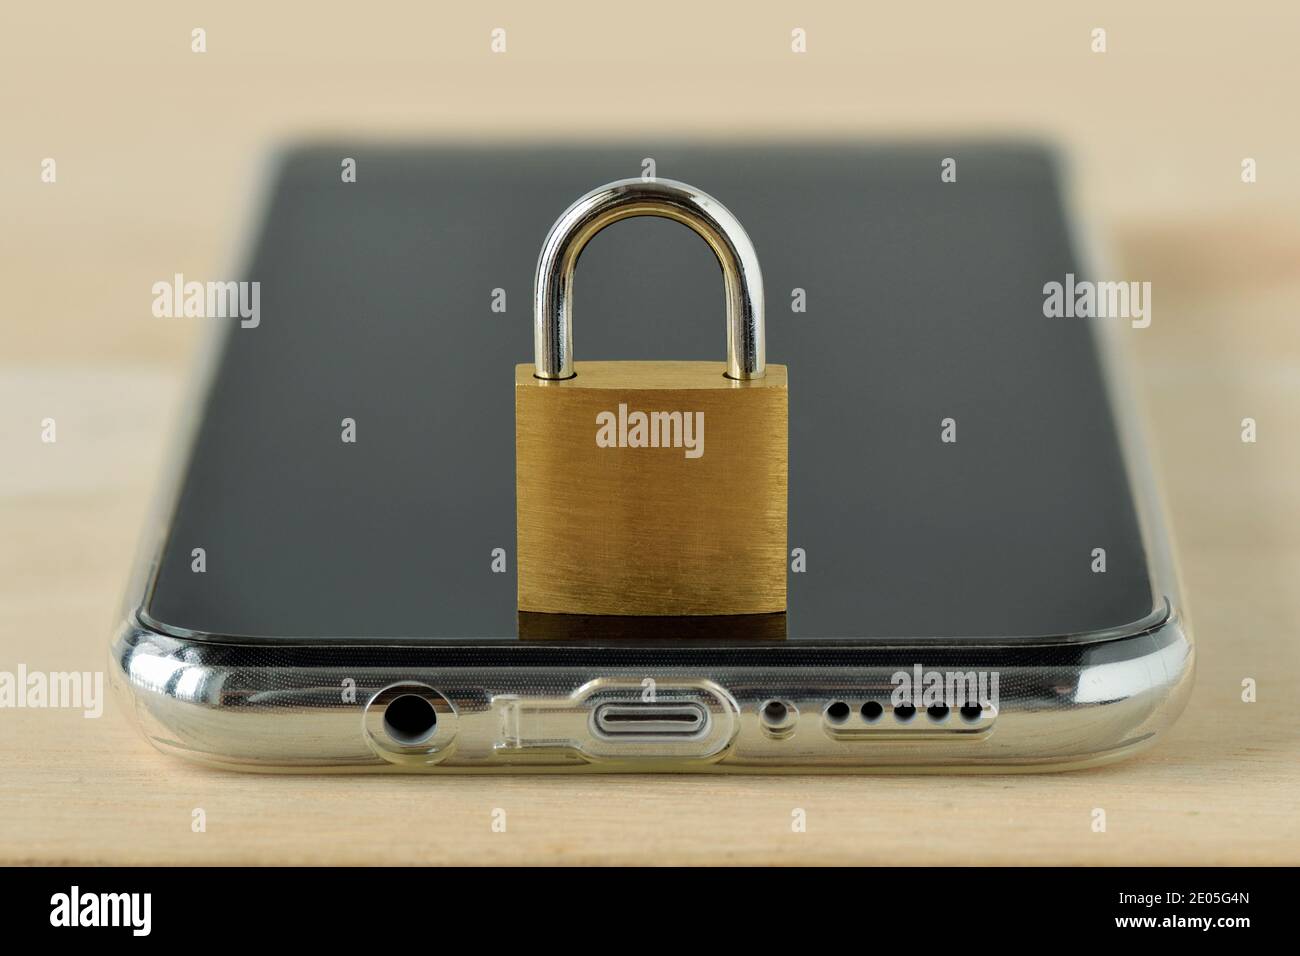 Closed padlock on smartphone - Concept of mobile security and data privacy Stock Photo